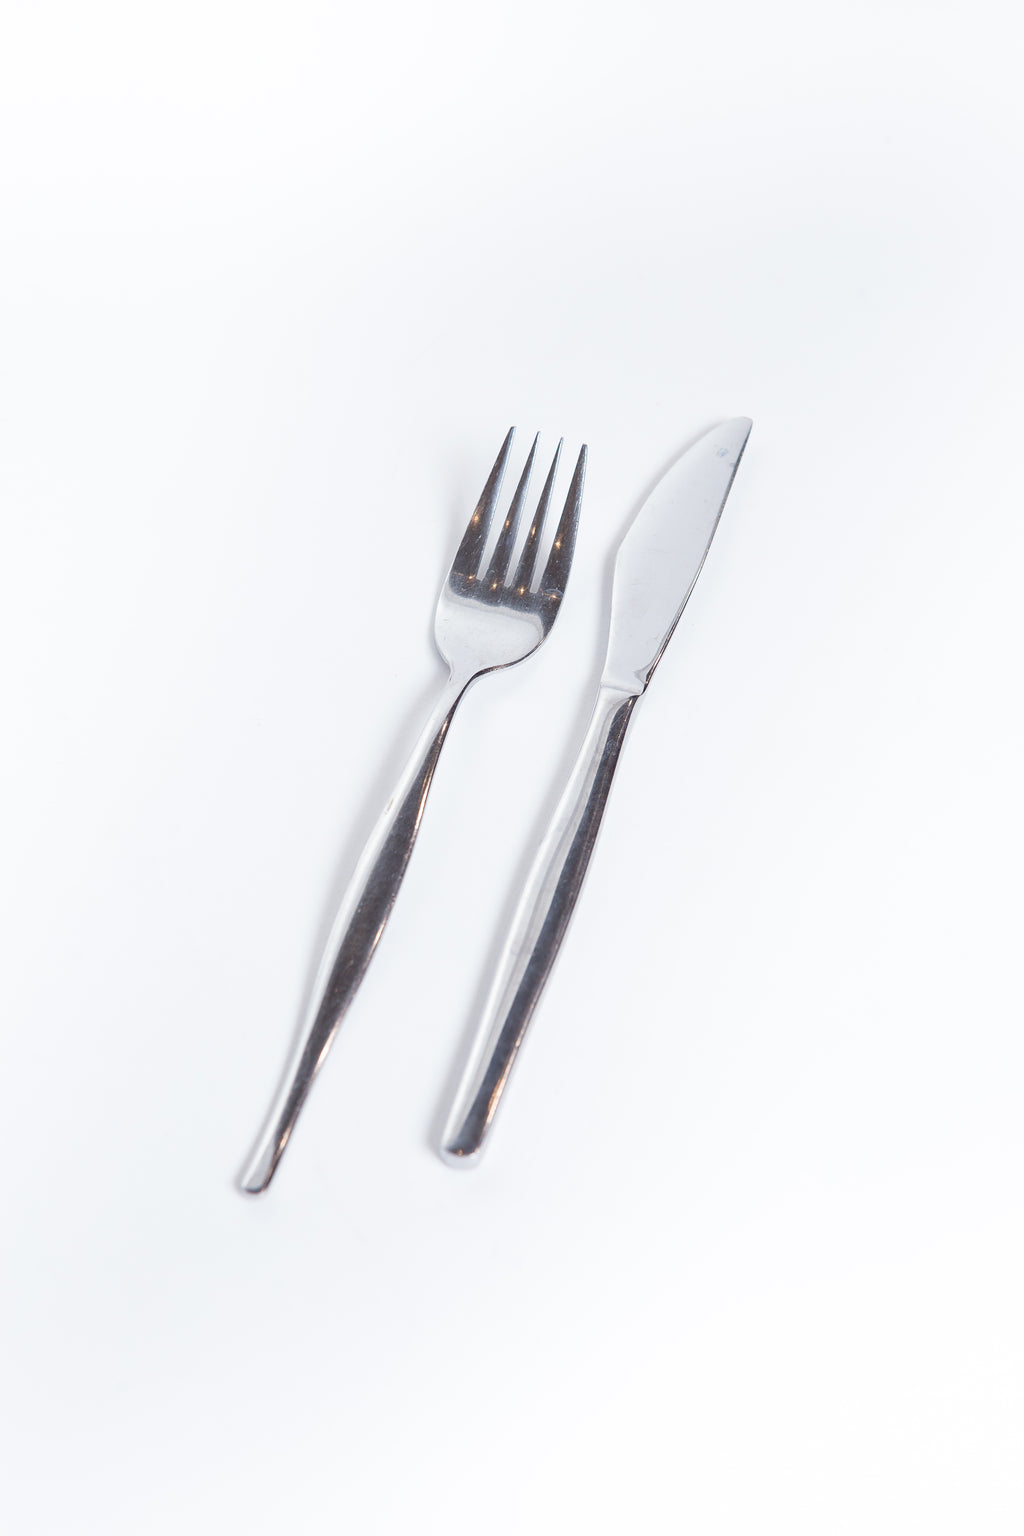 Pointed Entree/Butter Knife